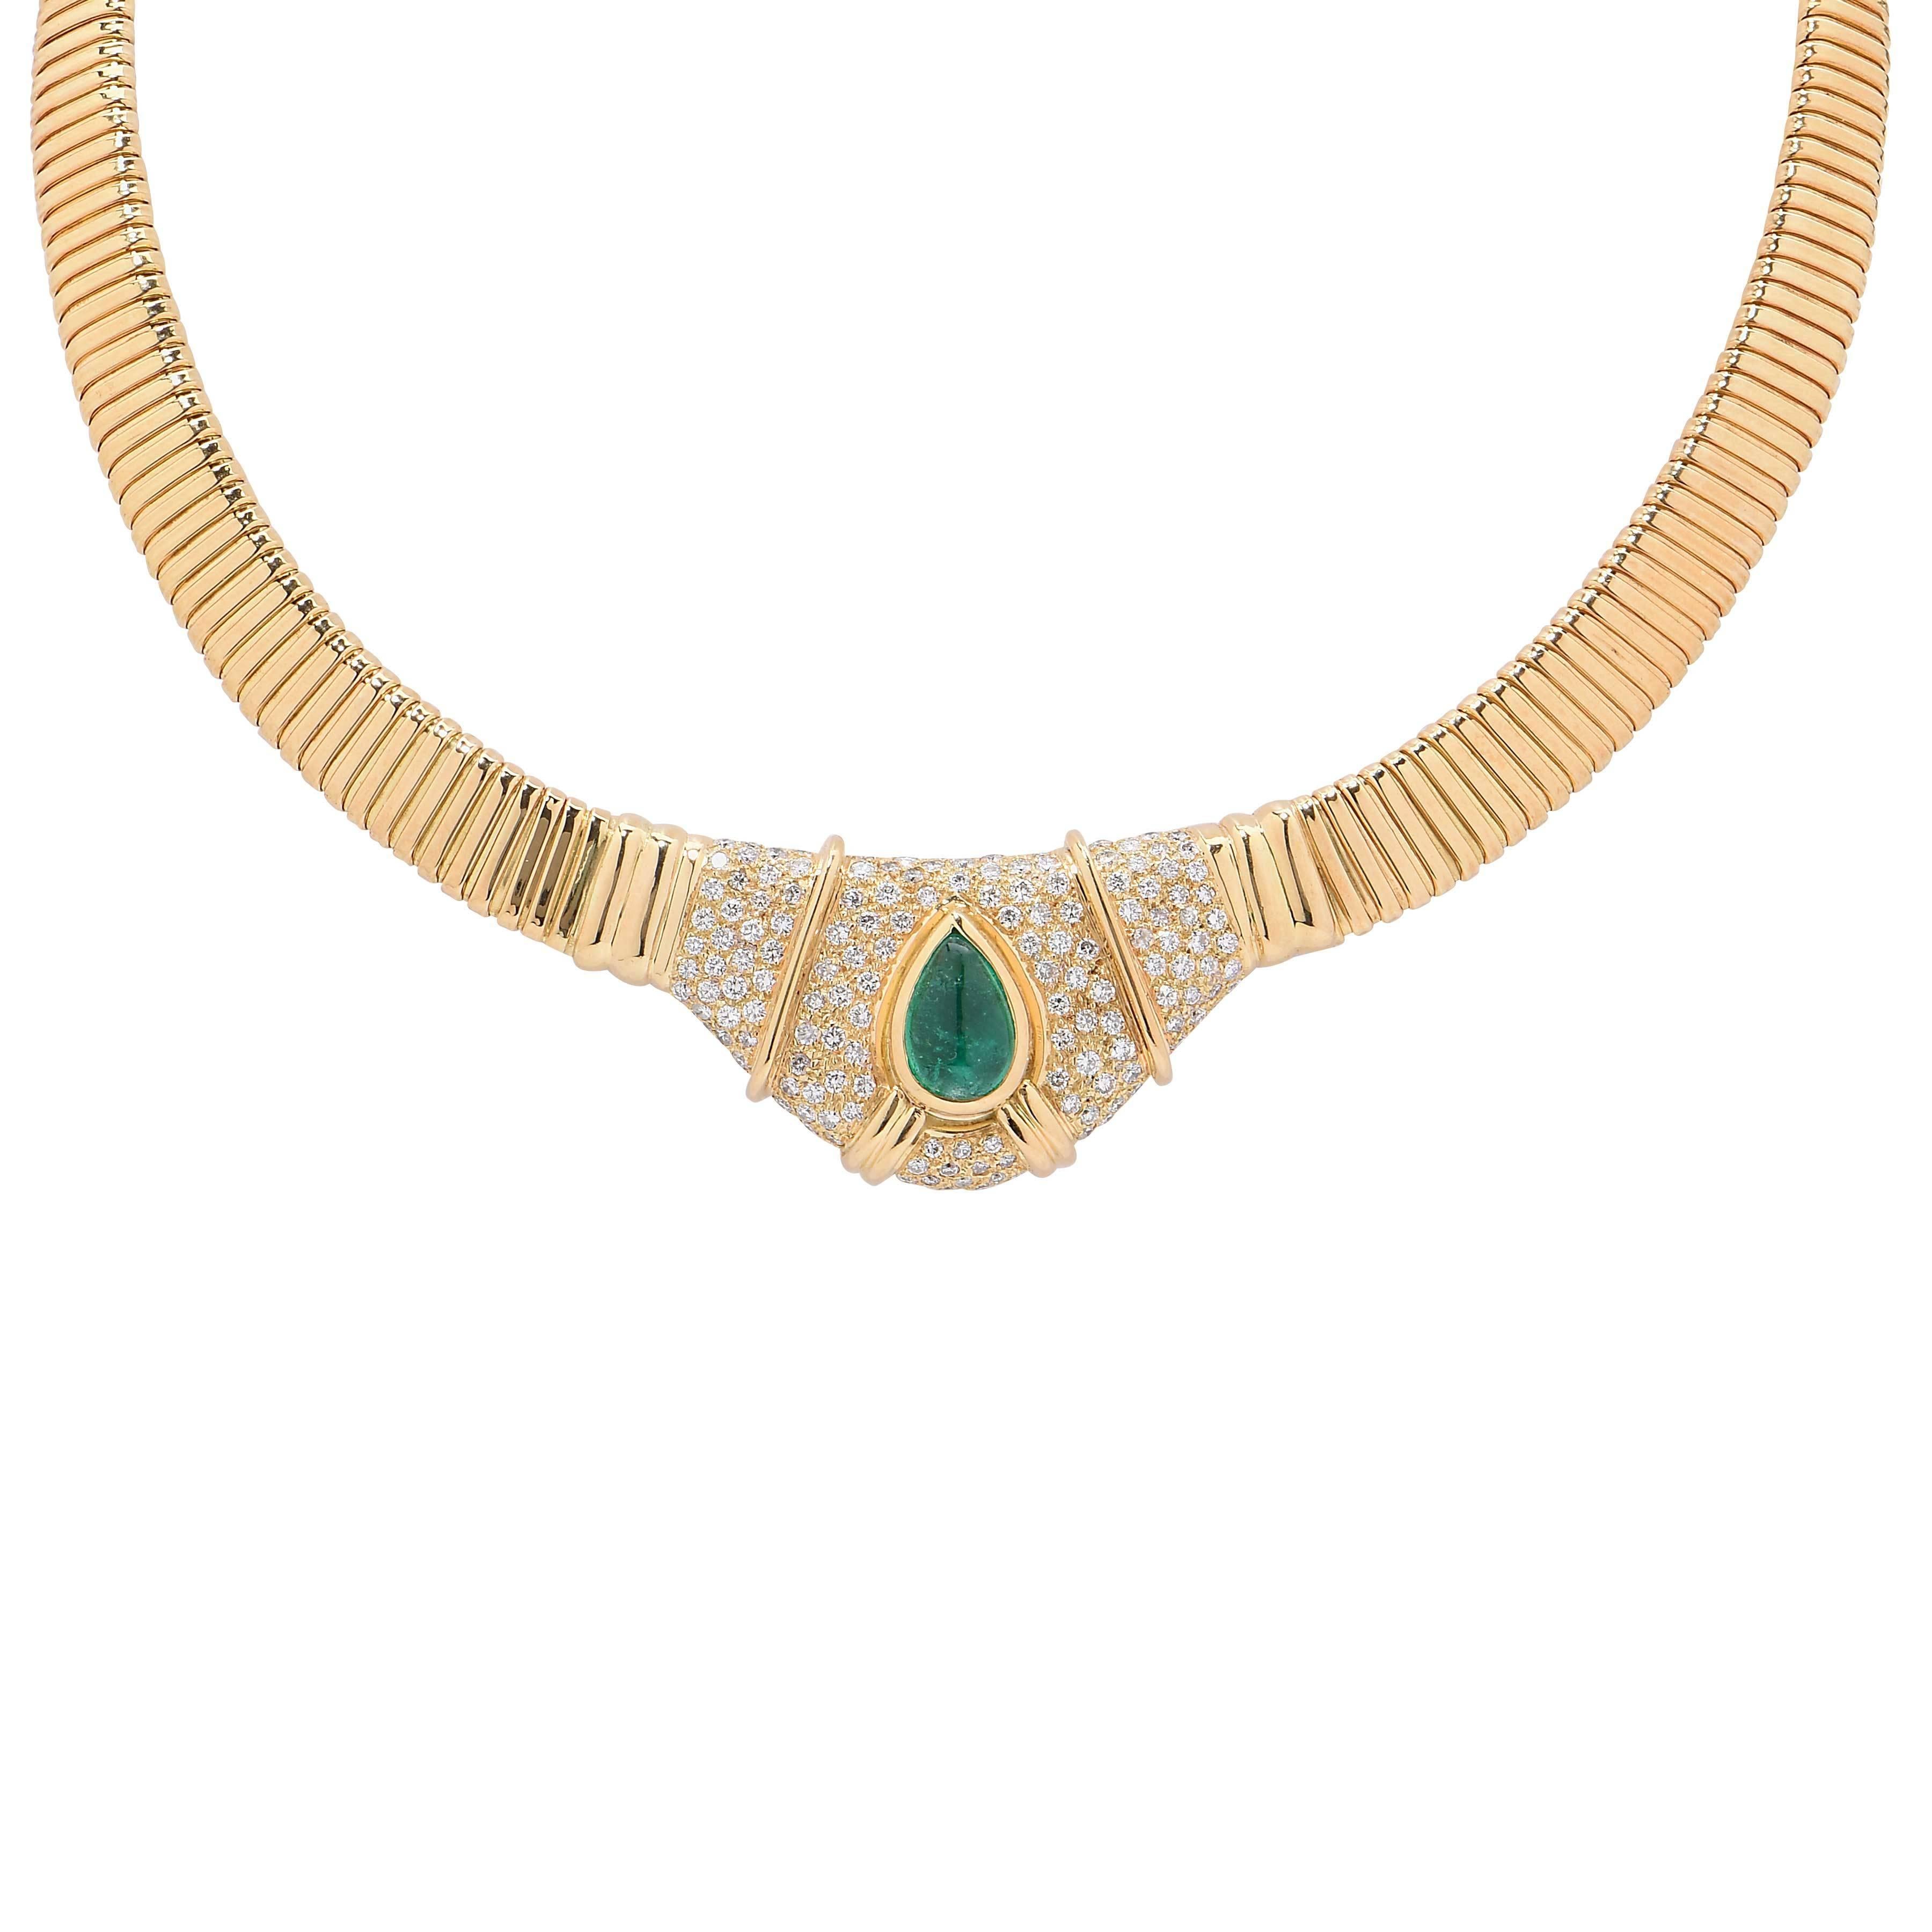 Tubogas necklace with 140 diamonds weighing approximately 2.10 carats, and one cabochon emerald drop weighing approximately 3 carats. Circa 1980

Metal Type: 18 Carat